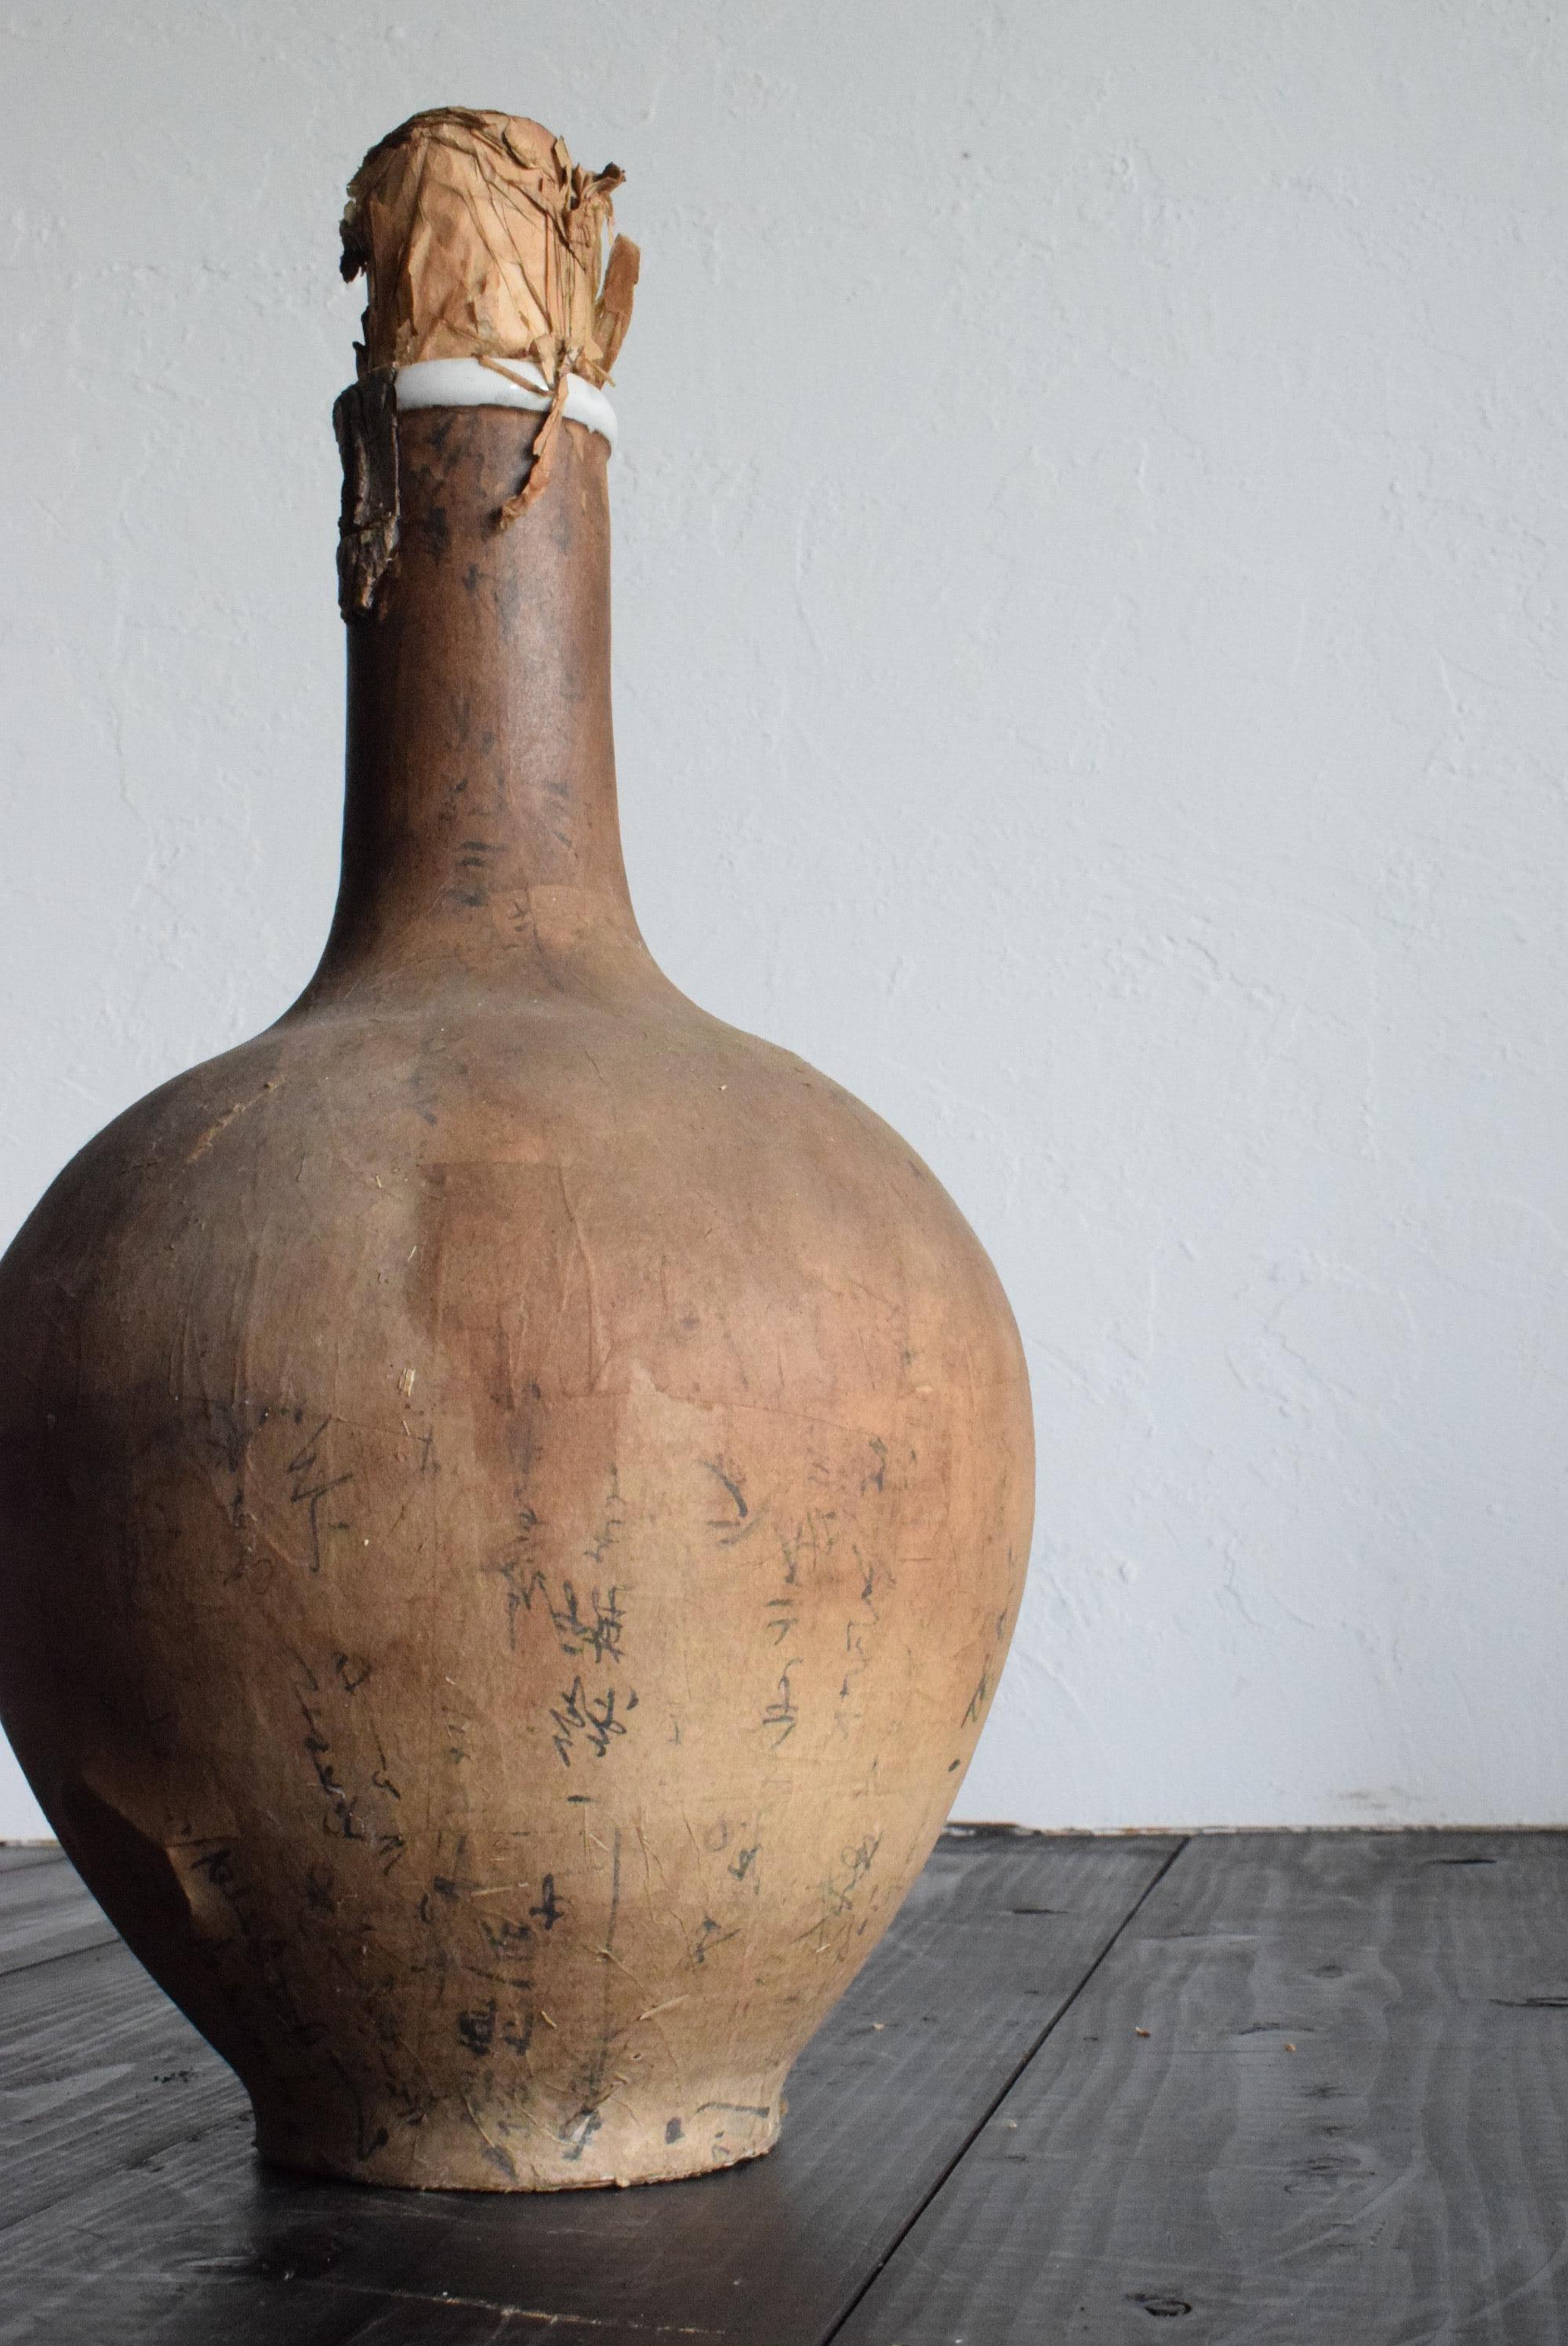 This is an old Japanese sake bottle. It is from the Meiji period (1860s-1900s). It is made of ceramic and covered with paper. It is slightly cracked and reinforced with paper. The paper is peeling off in places, giving it the beauty of an abstract